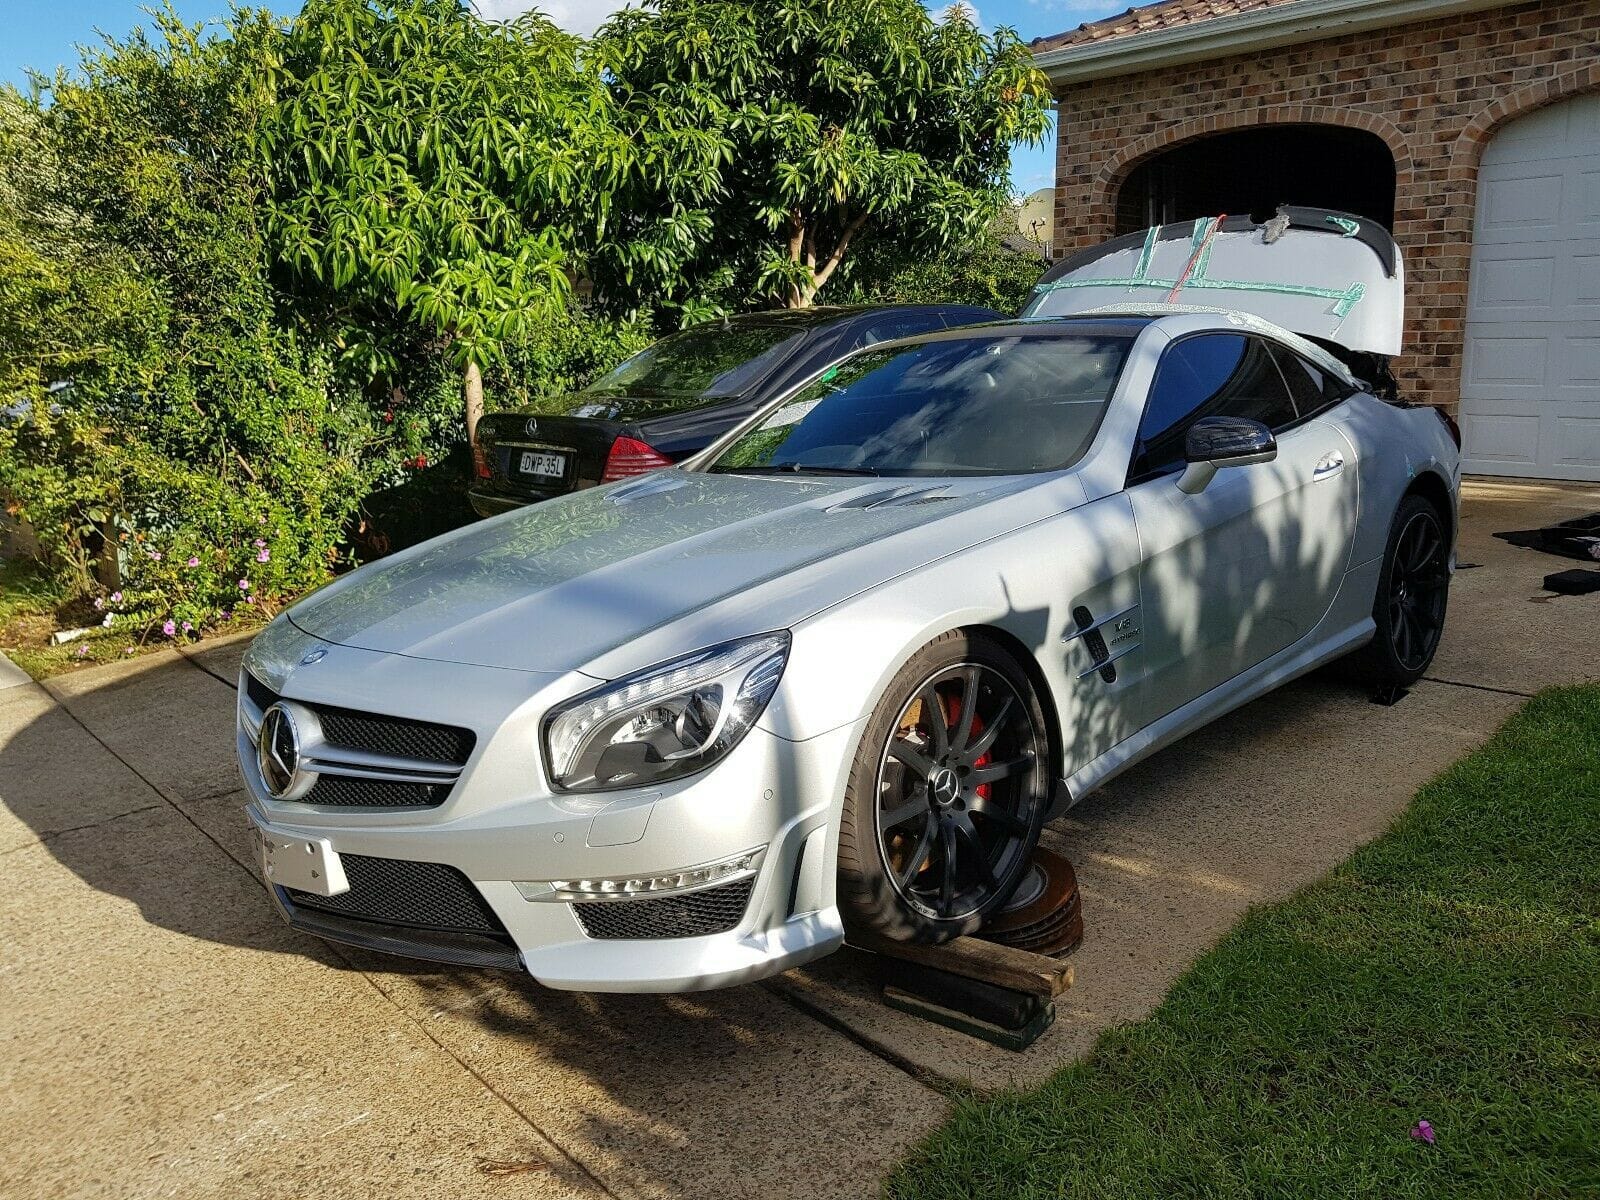 2012 Mercedes-Benz SL63 AMG - 2012 MERCEDES-BENZ SL63 AMG WRECKING PARTING OUT ALL PARTS AVAILABLE M157 BITURBO - Sydney, Australia